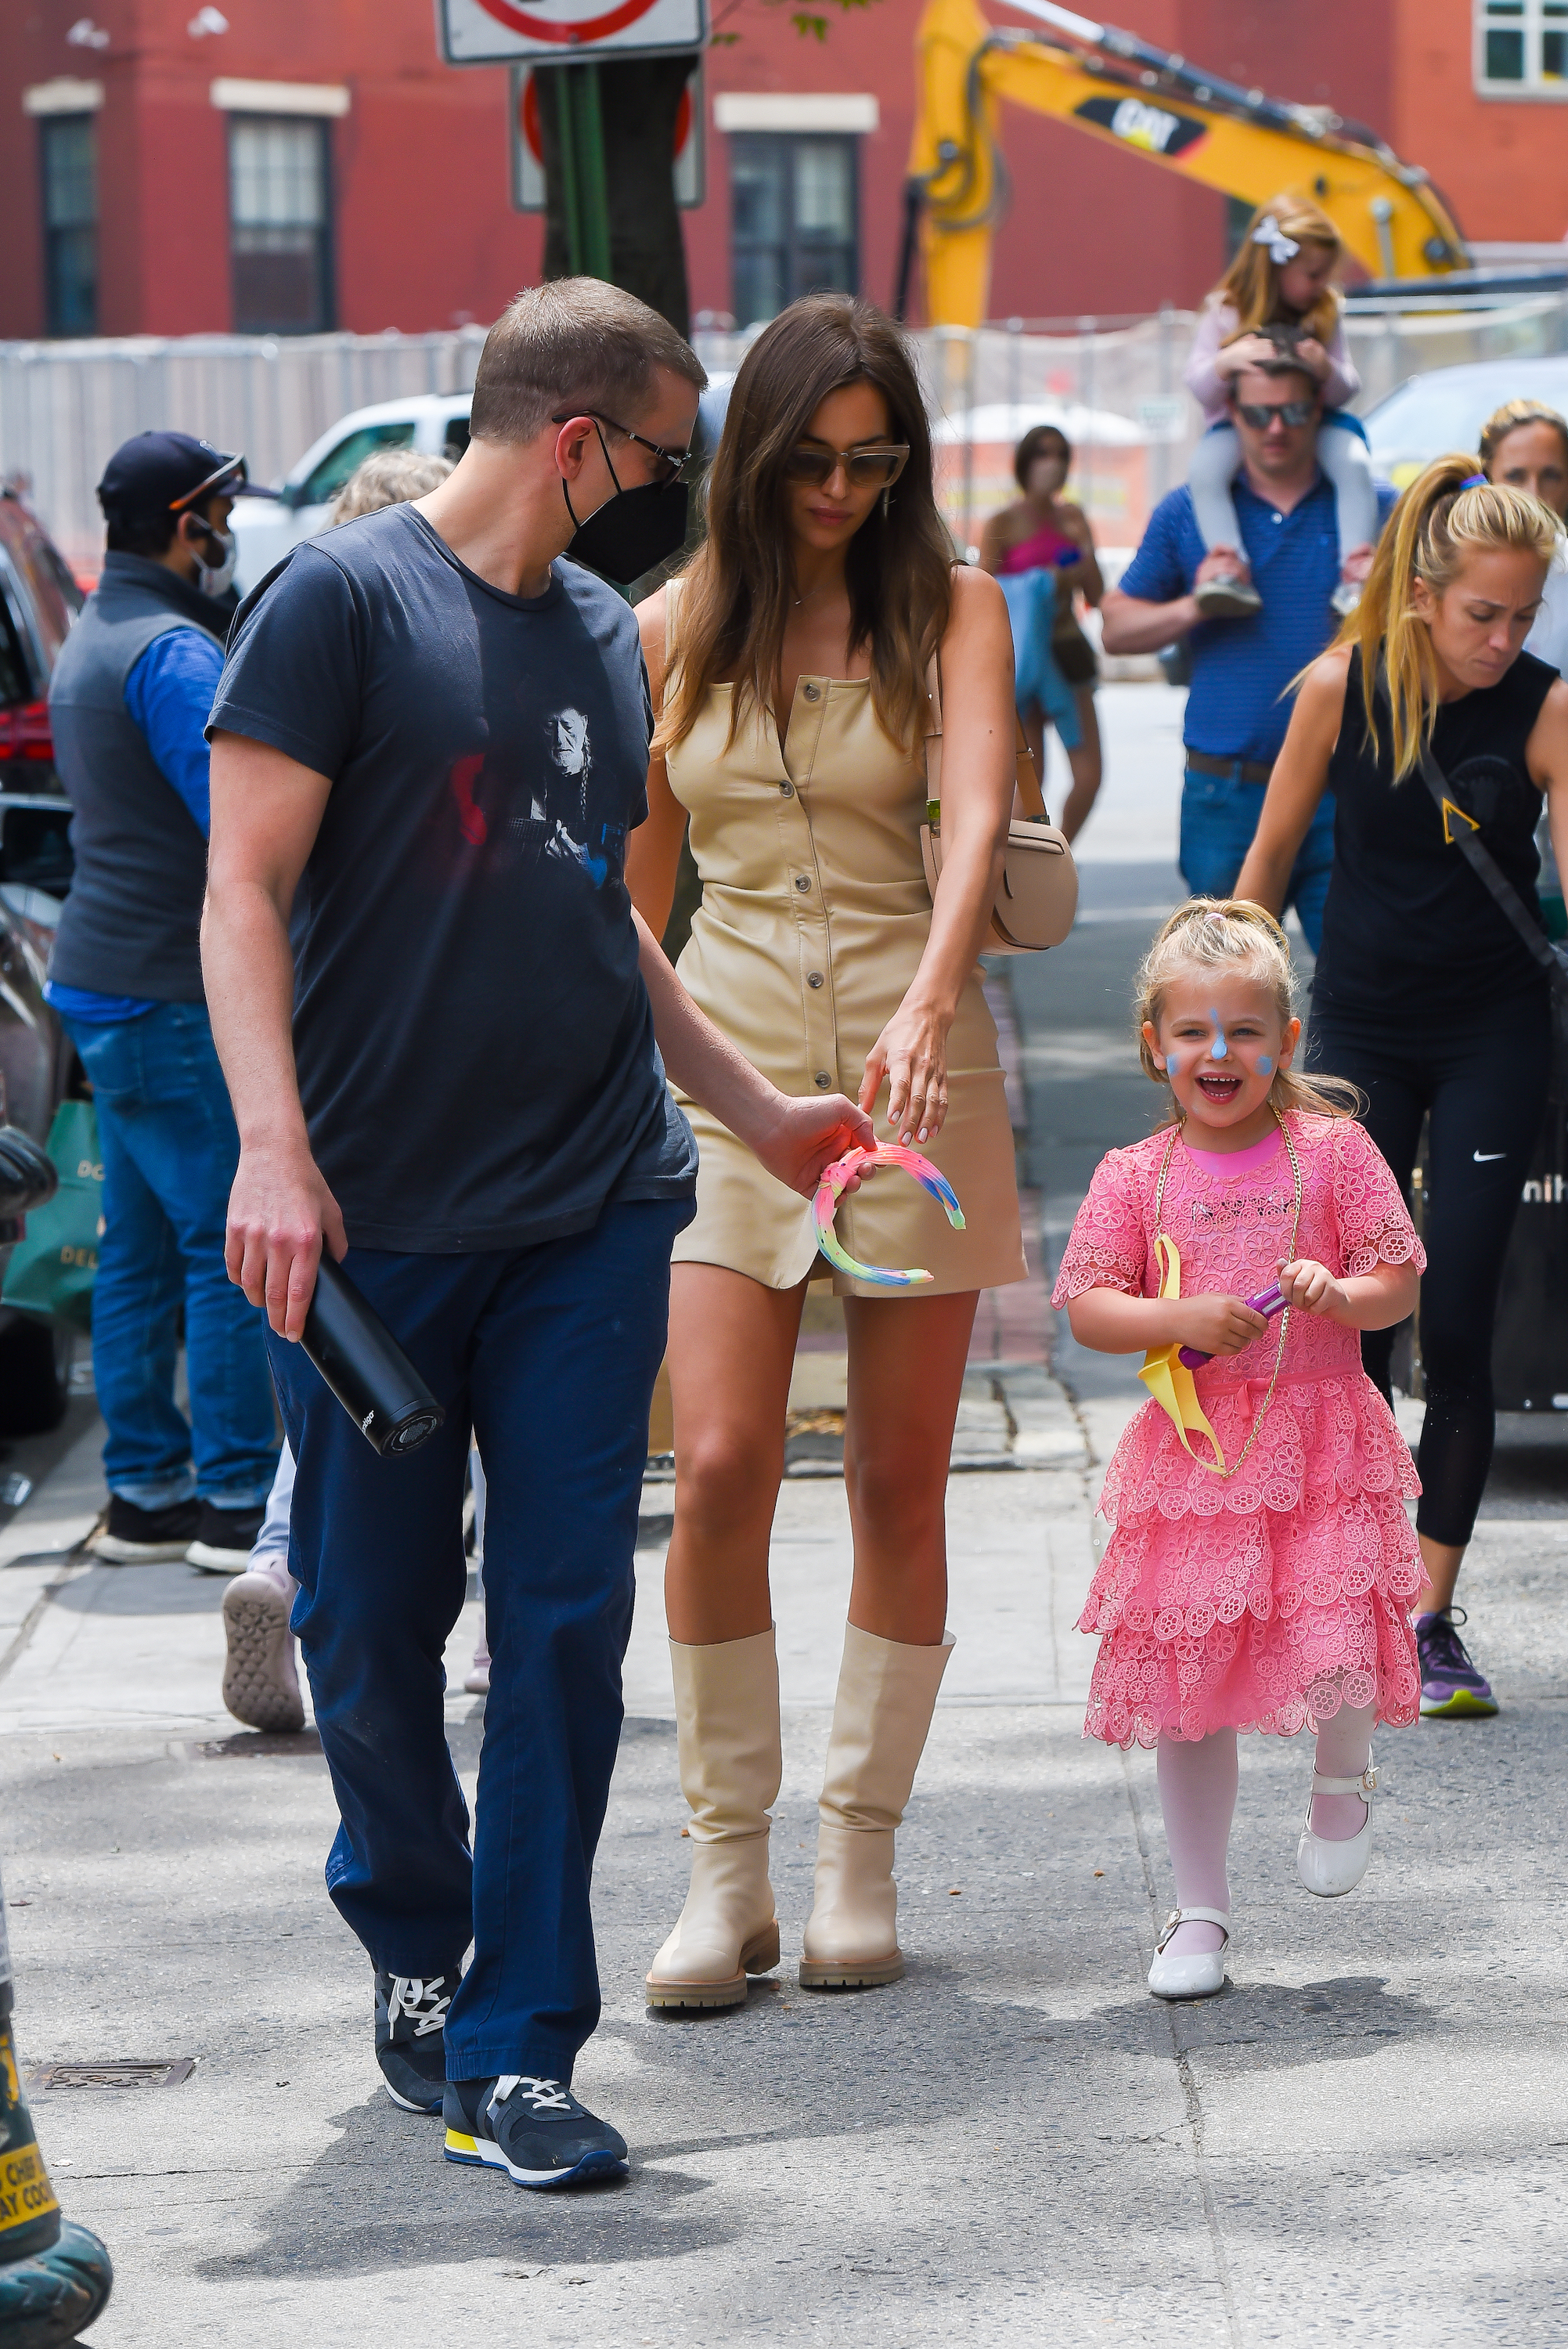 Bradley Cooper, Irina Shayk and their daughter Lea Cooper on June 02, 2021 in New York City. | Source: Getty Images